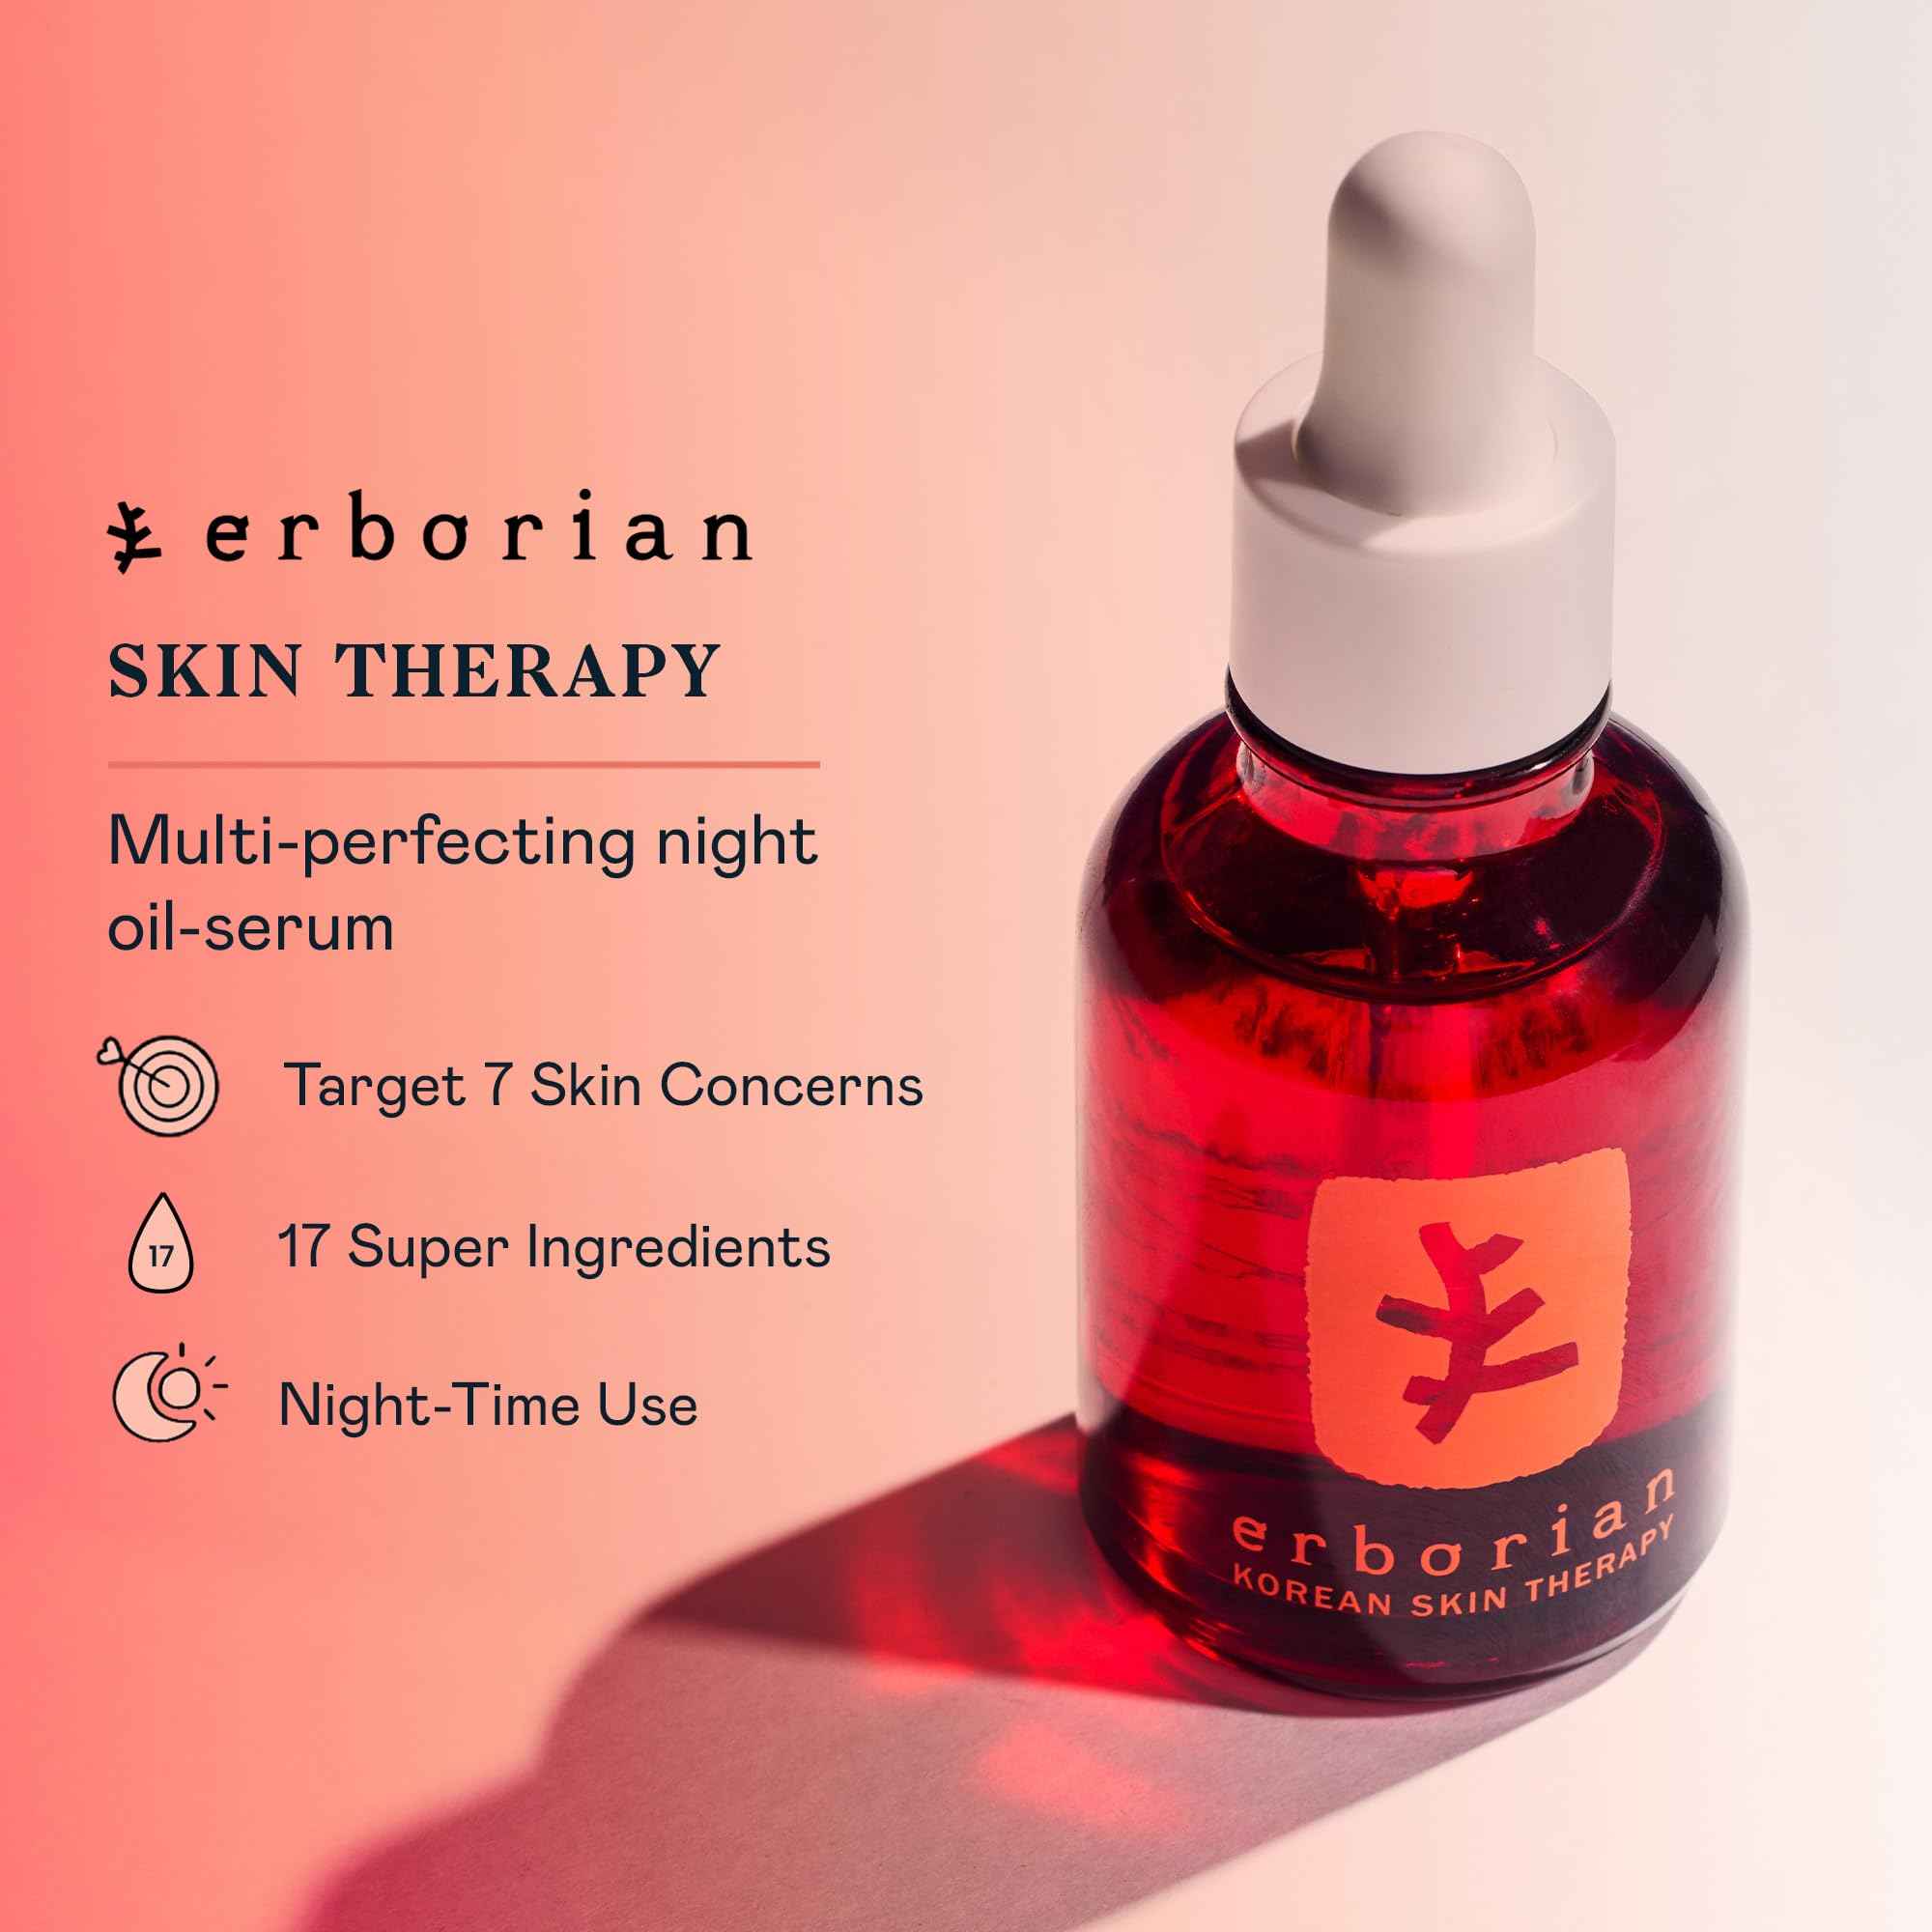 Skin Therapy Multi-Perfecting Bi-Phase Night Oil-Serum - Supercharged With 17 Ingredients -Targets 7 Skin Concerns - Improves Appearance of Fine Lines, Skin Texture and Complexion Evenness